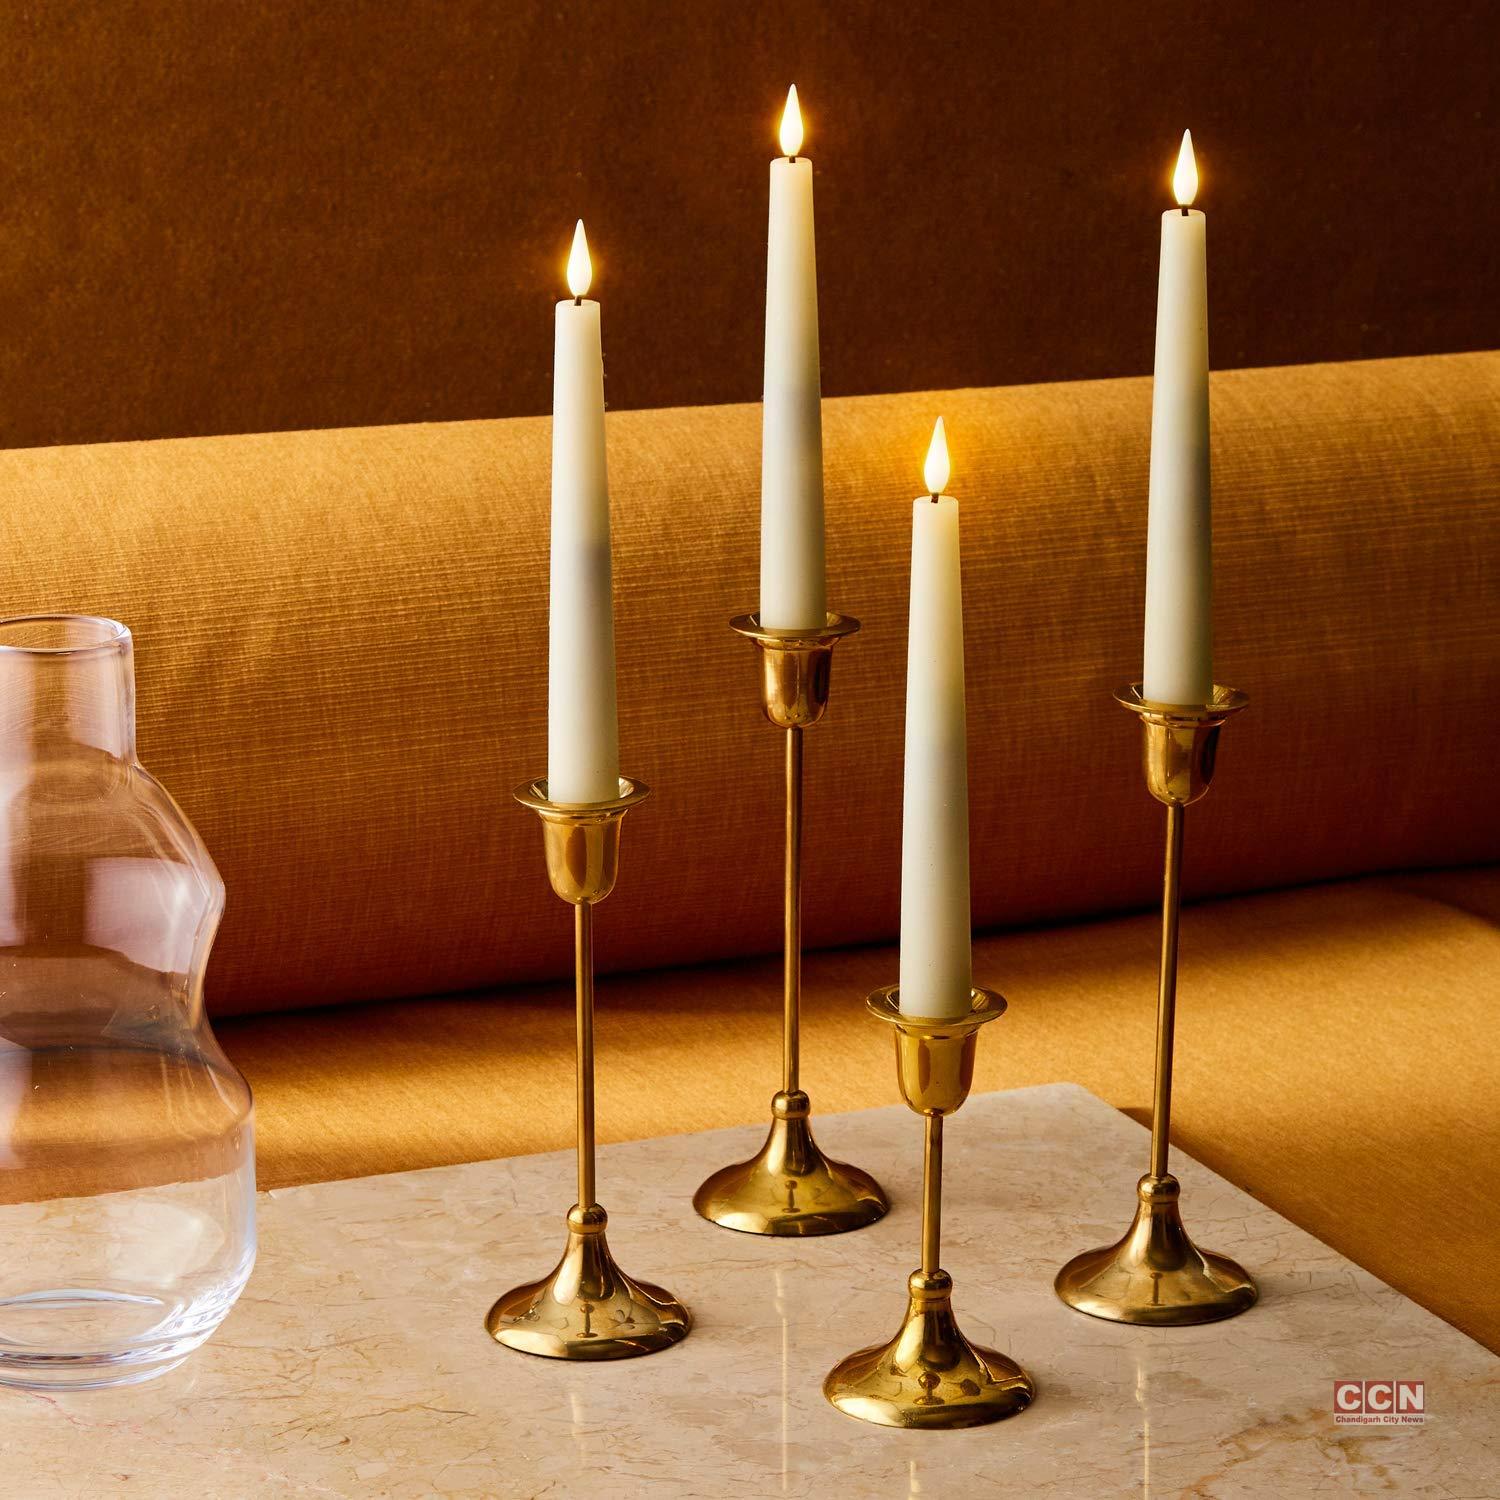 Candles :- Types, Benefits, and Stunning Images